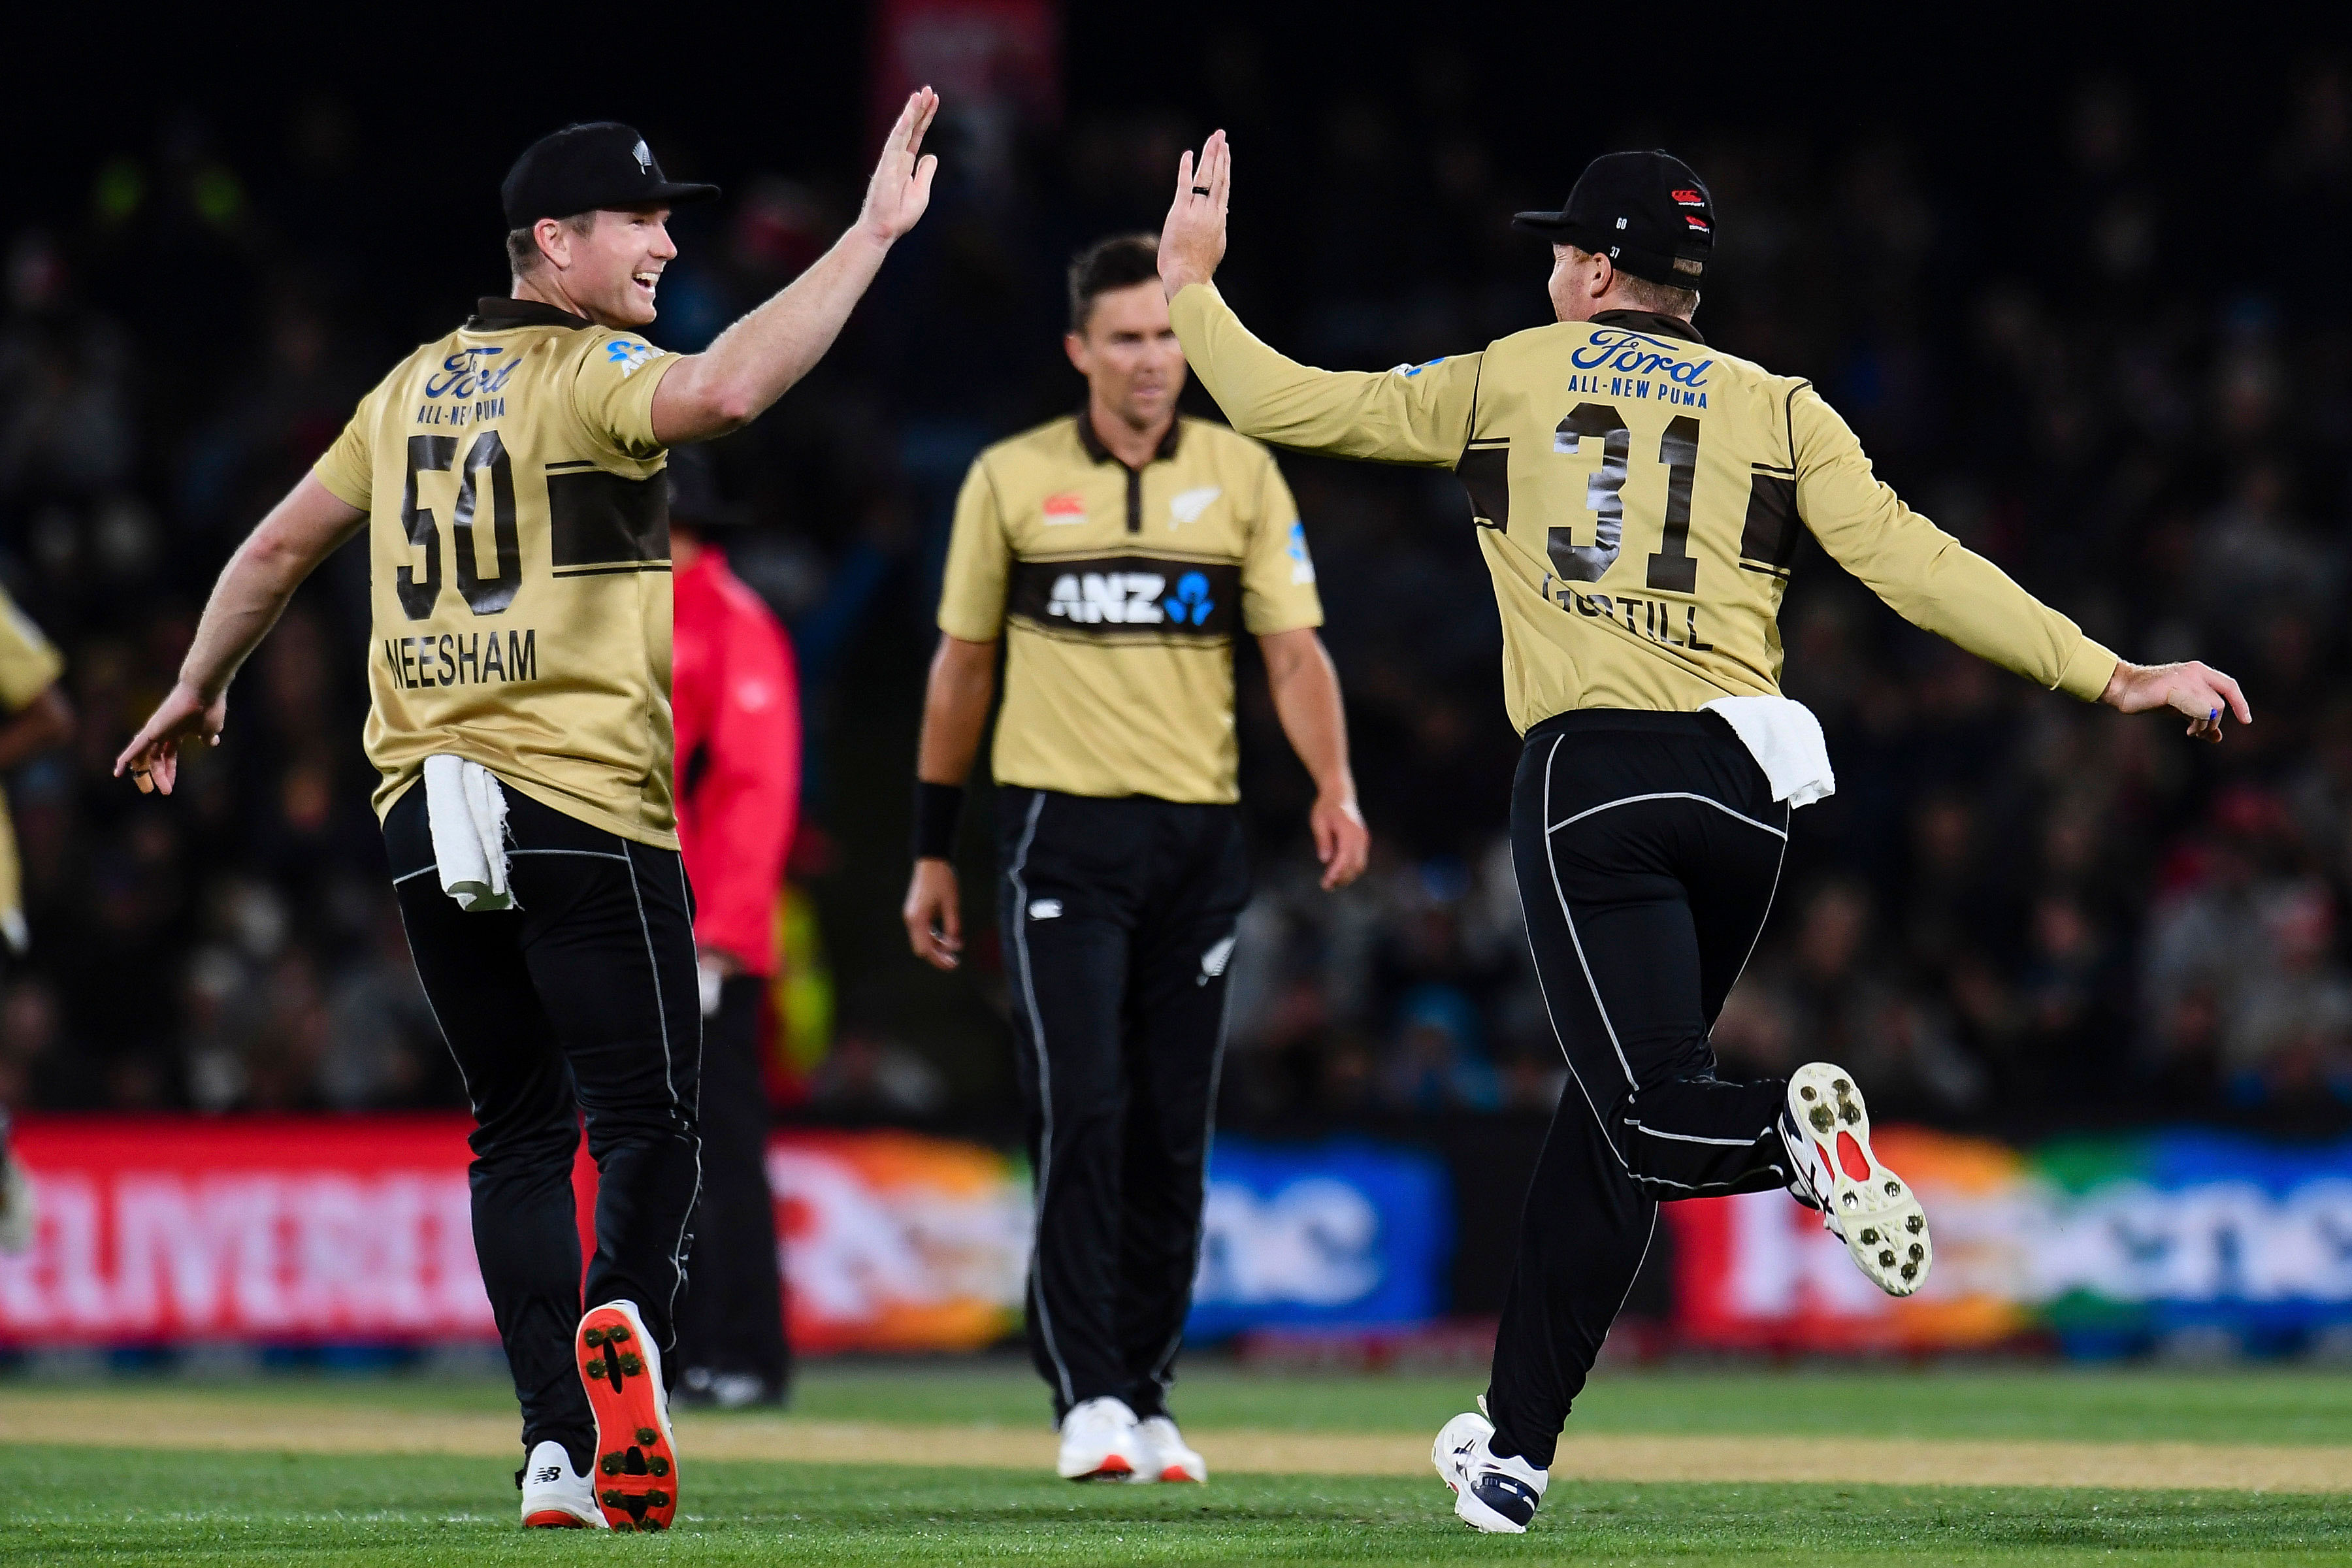 New Zealand's James Neesham, left, and Martin Guptill celebrate the wicket of Australia's Matthew Wade during the first T20 cricket international between Australia and New Zealand at Hagley Oval in Christchurch, New Zealand, Monday, Feb. 22, 2021. Credit: AP/PTI Photo